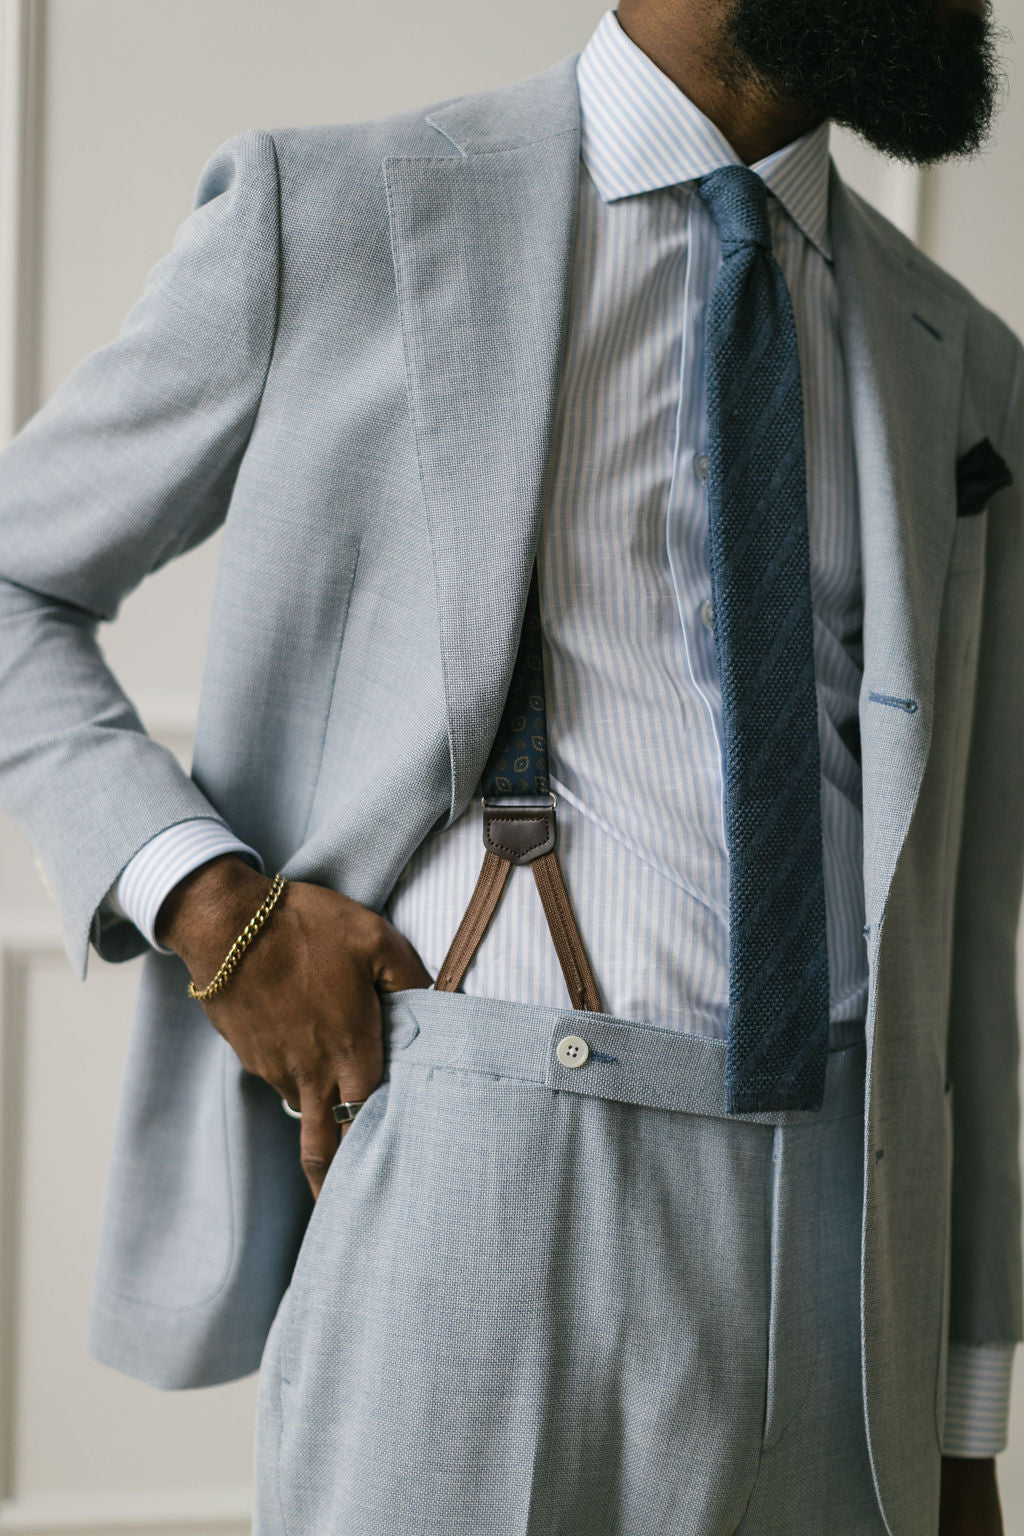 Brown linen suit with a tan knit tie